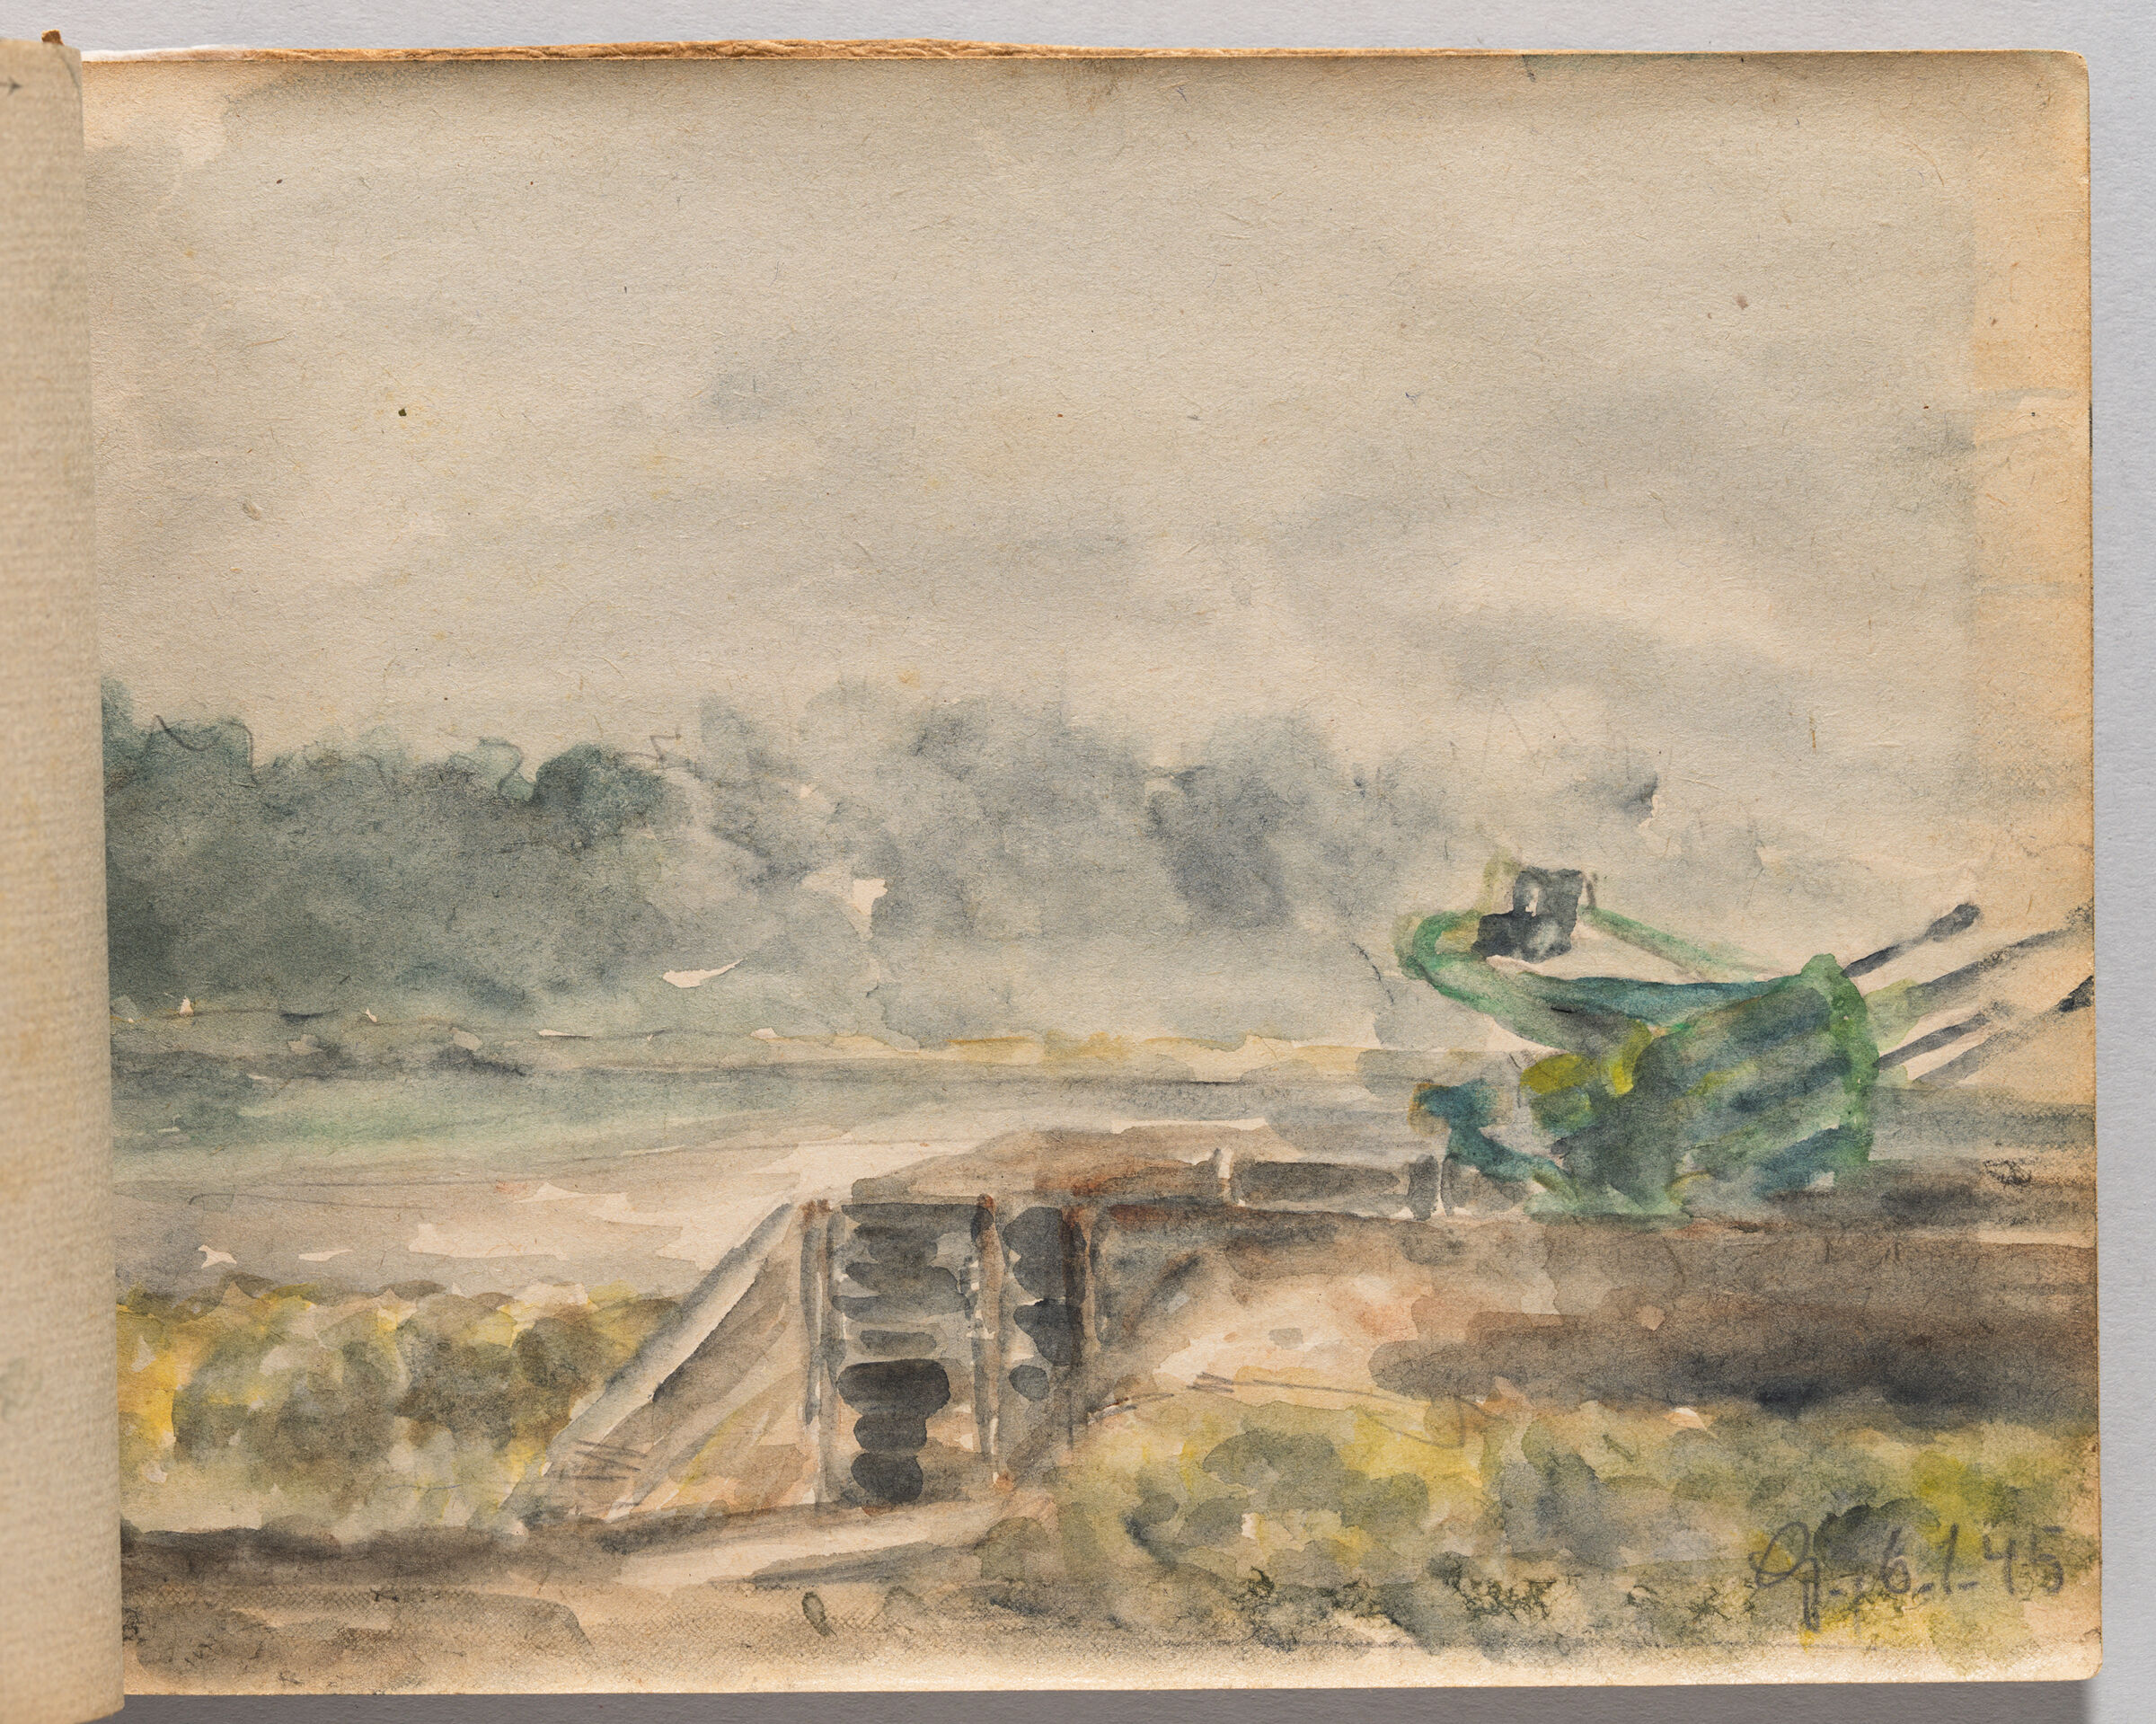 Untitled (Blank, Left Page); Untitled (Field With Tank, Right Page)